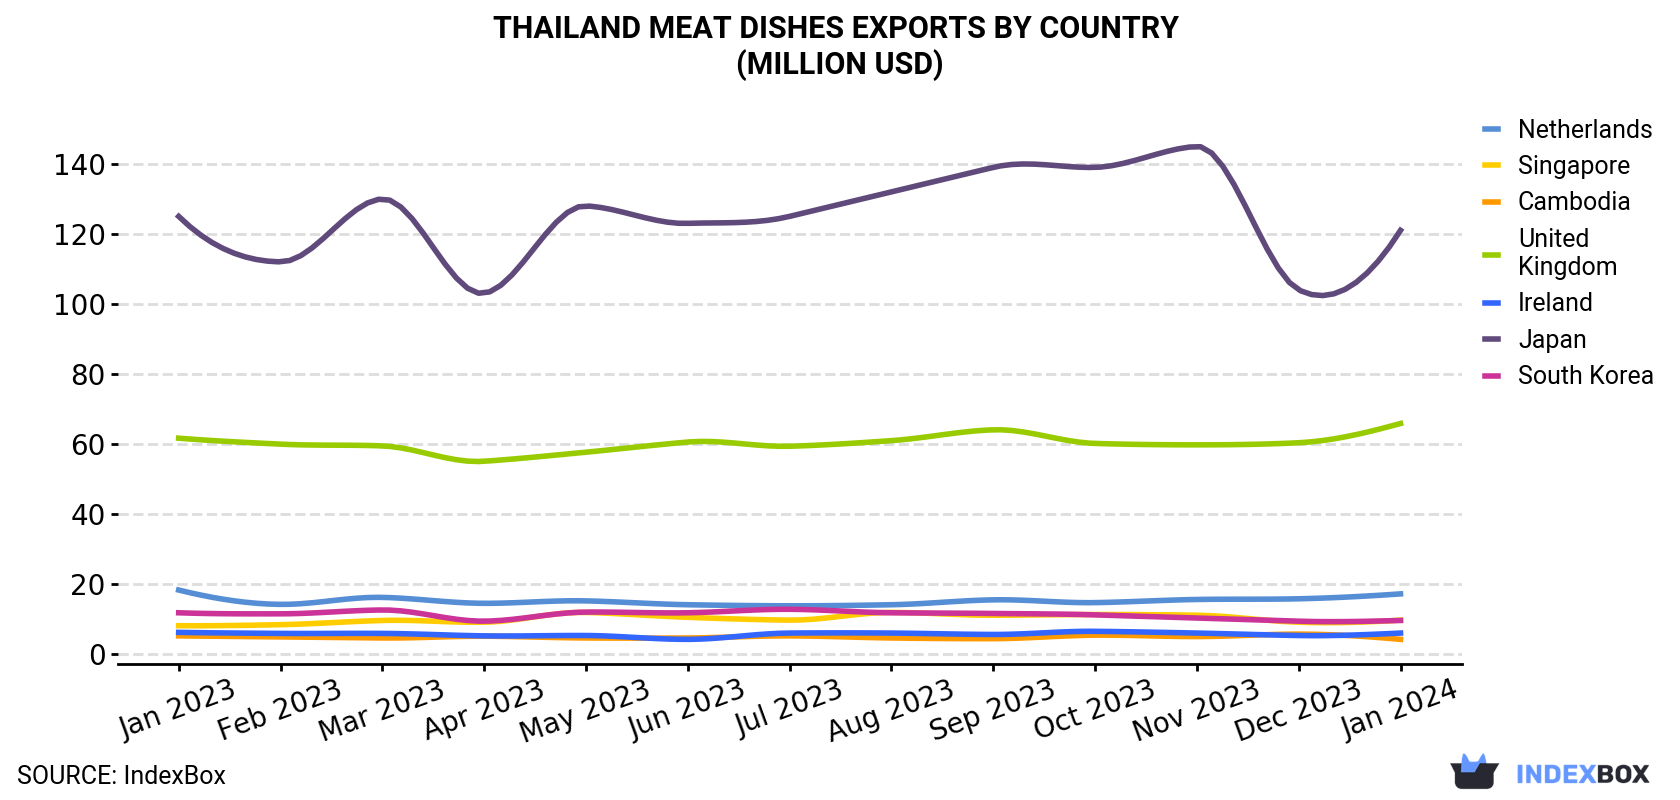 Thailand Meat Dishes Exports By Country (Million USD)